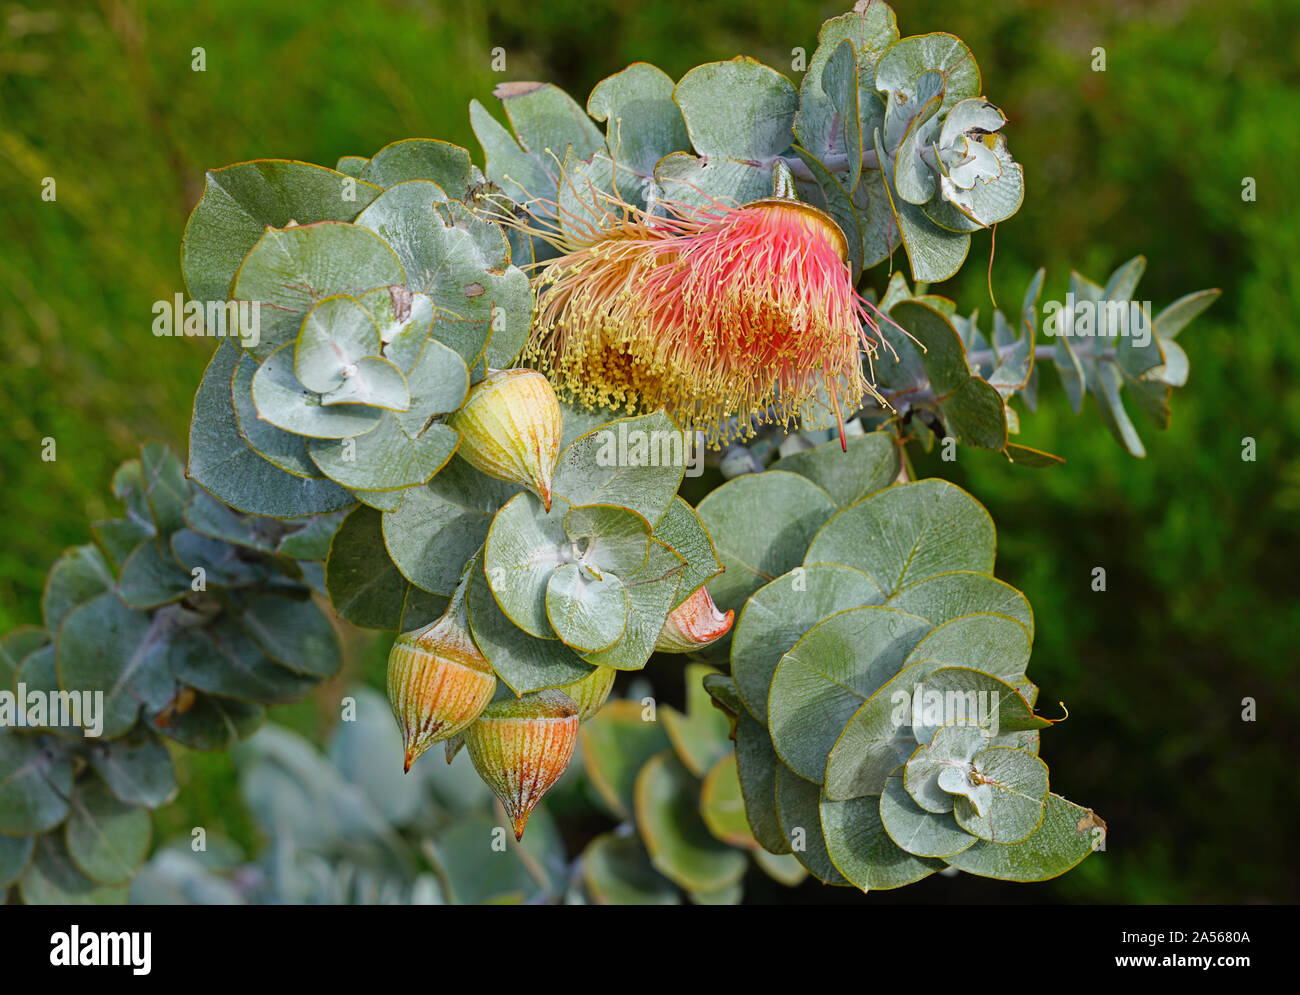 View of a Rose Mallee eucalyptus flower in Australia Stock Photo